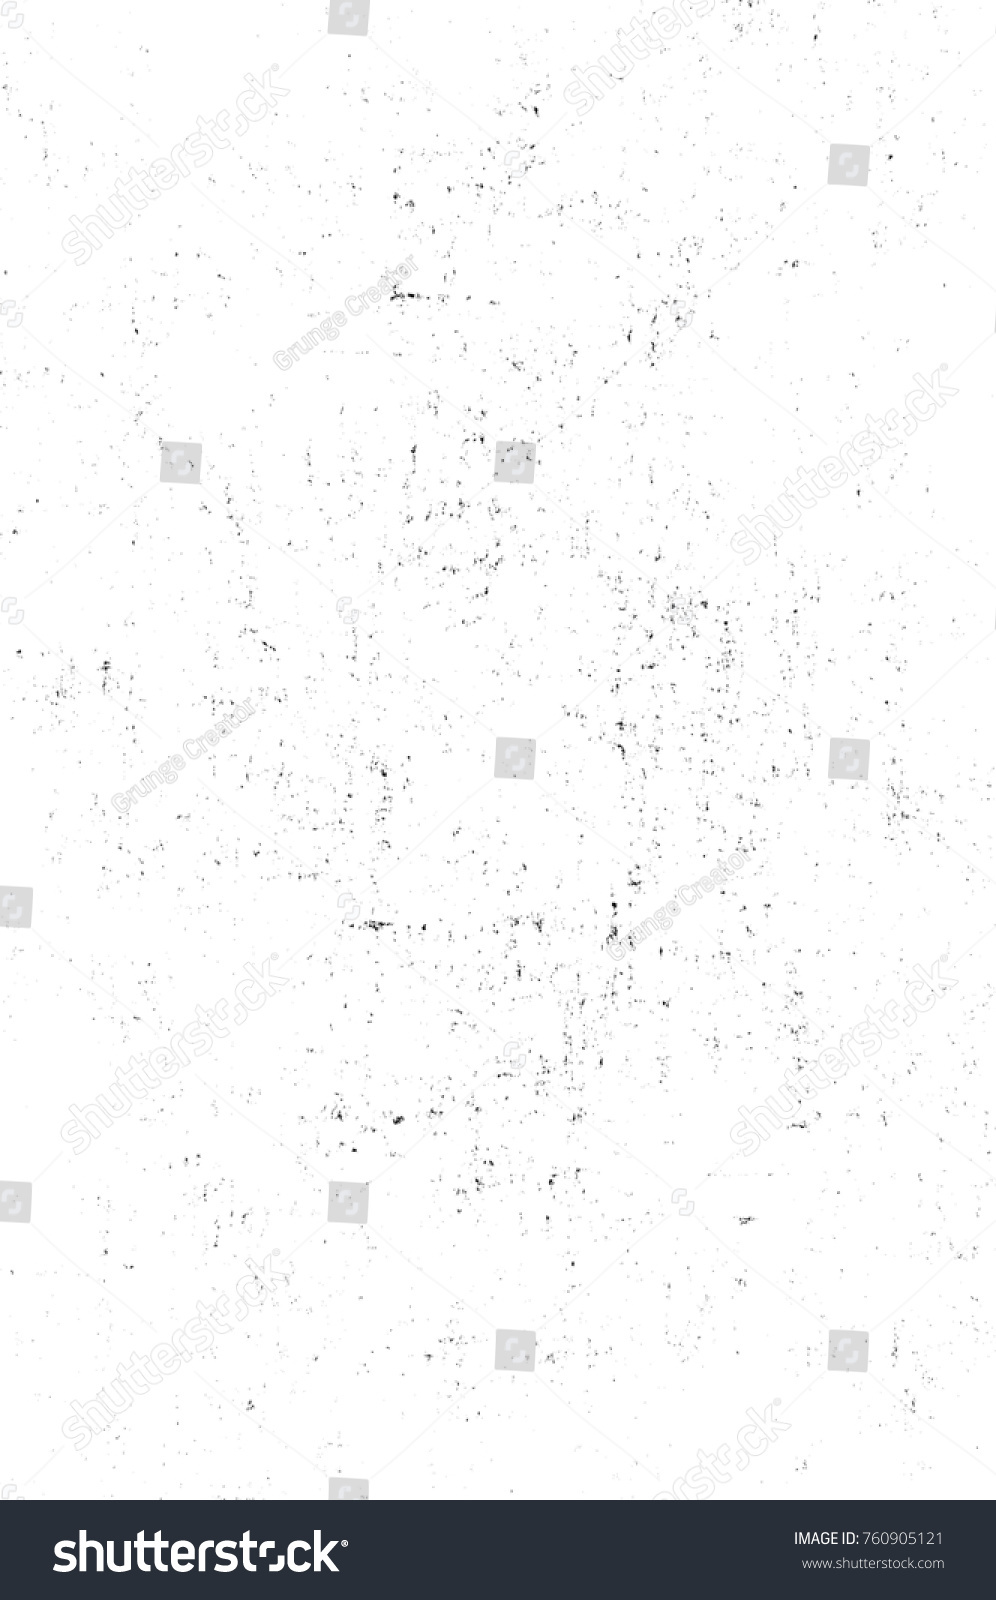 Grunge black and white pattern. Monochrome particles abstract texture. Background of cracks, scuffs, chips, stains, ink spots, lines. Dark design background surface. Gray printing element #760905121